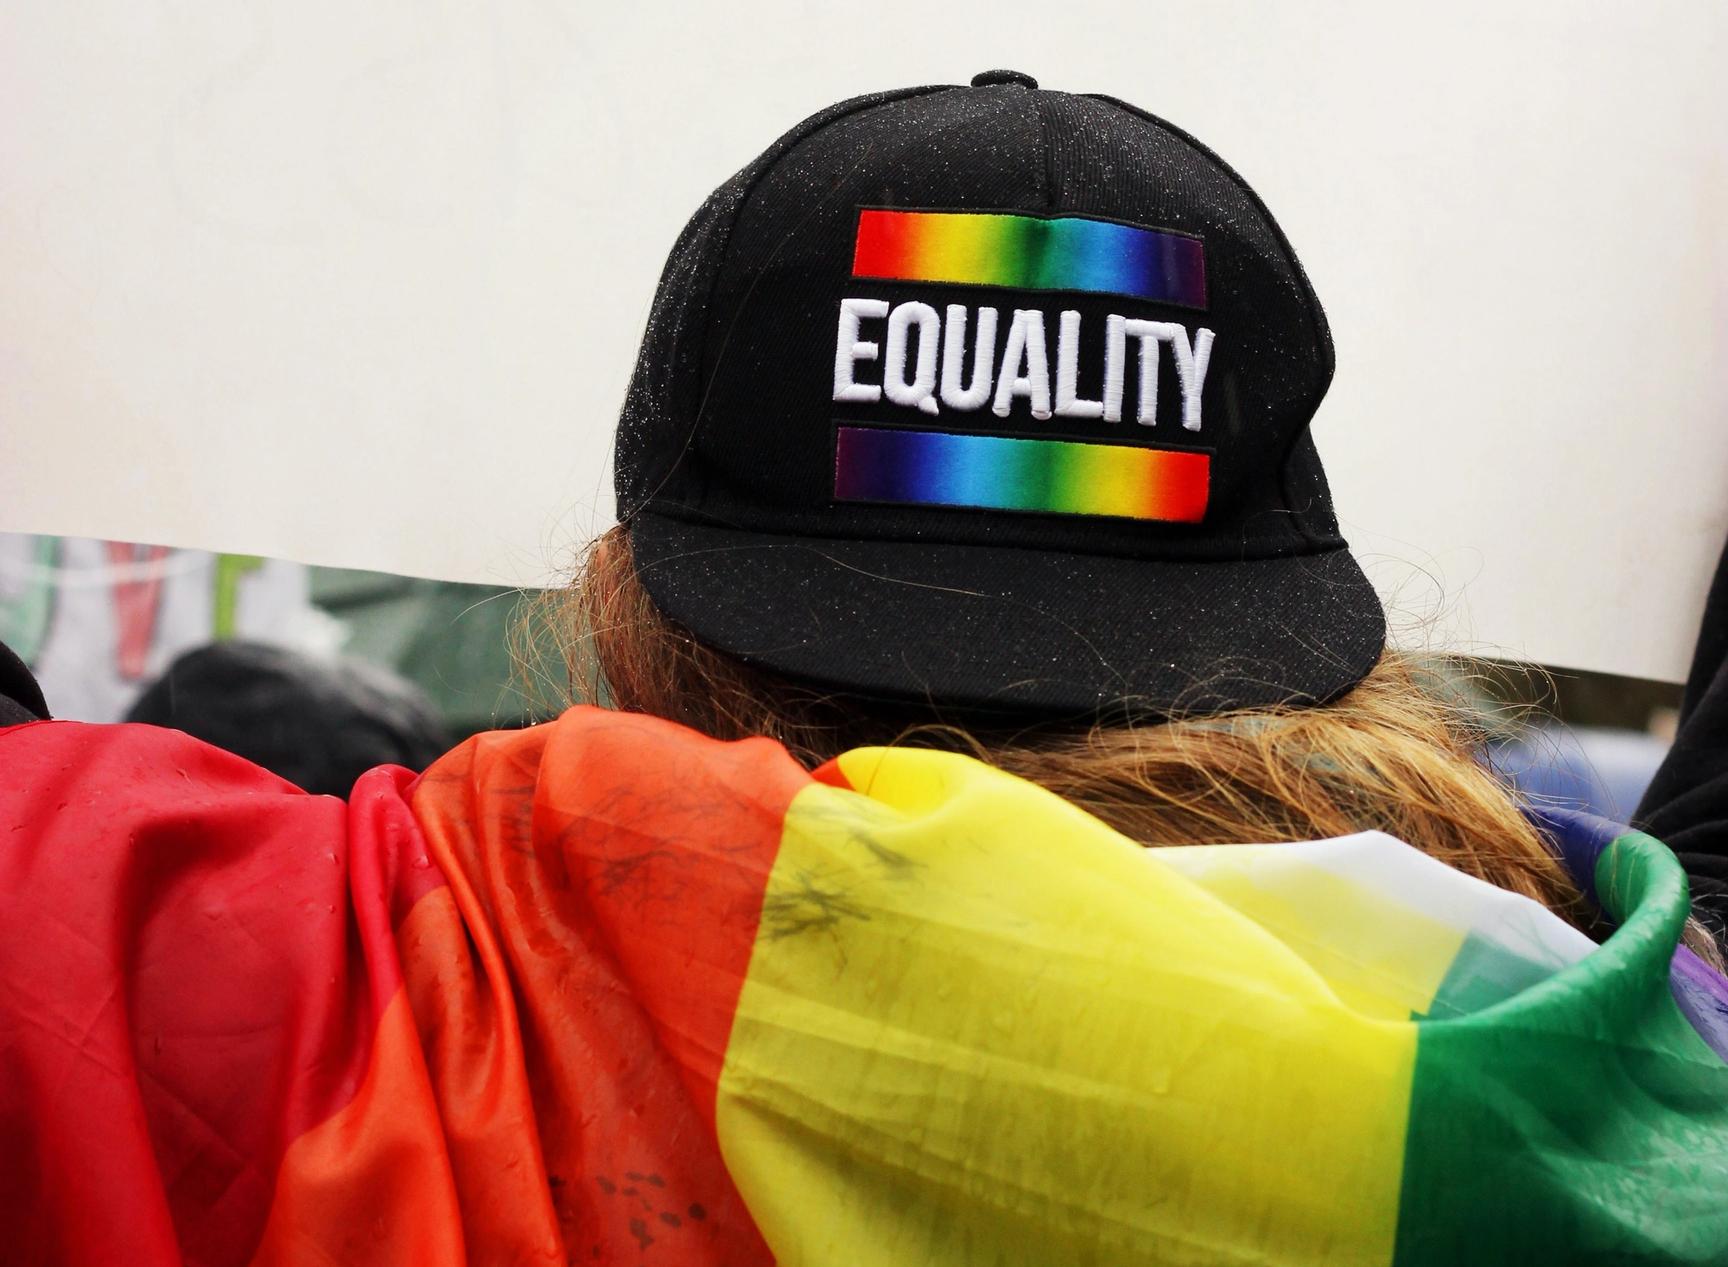 A person with an LGBT flag over his back and a cap with the text "equality".